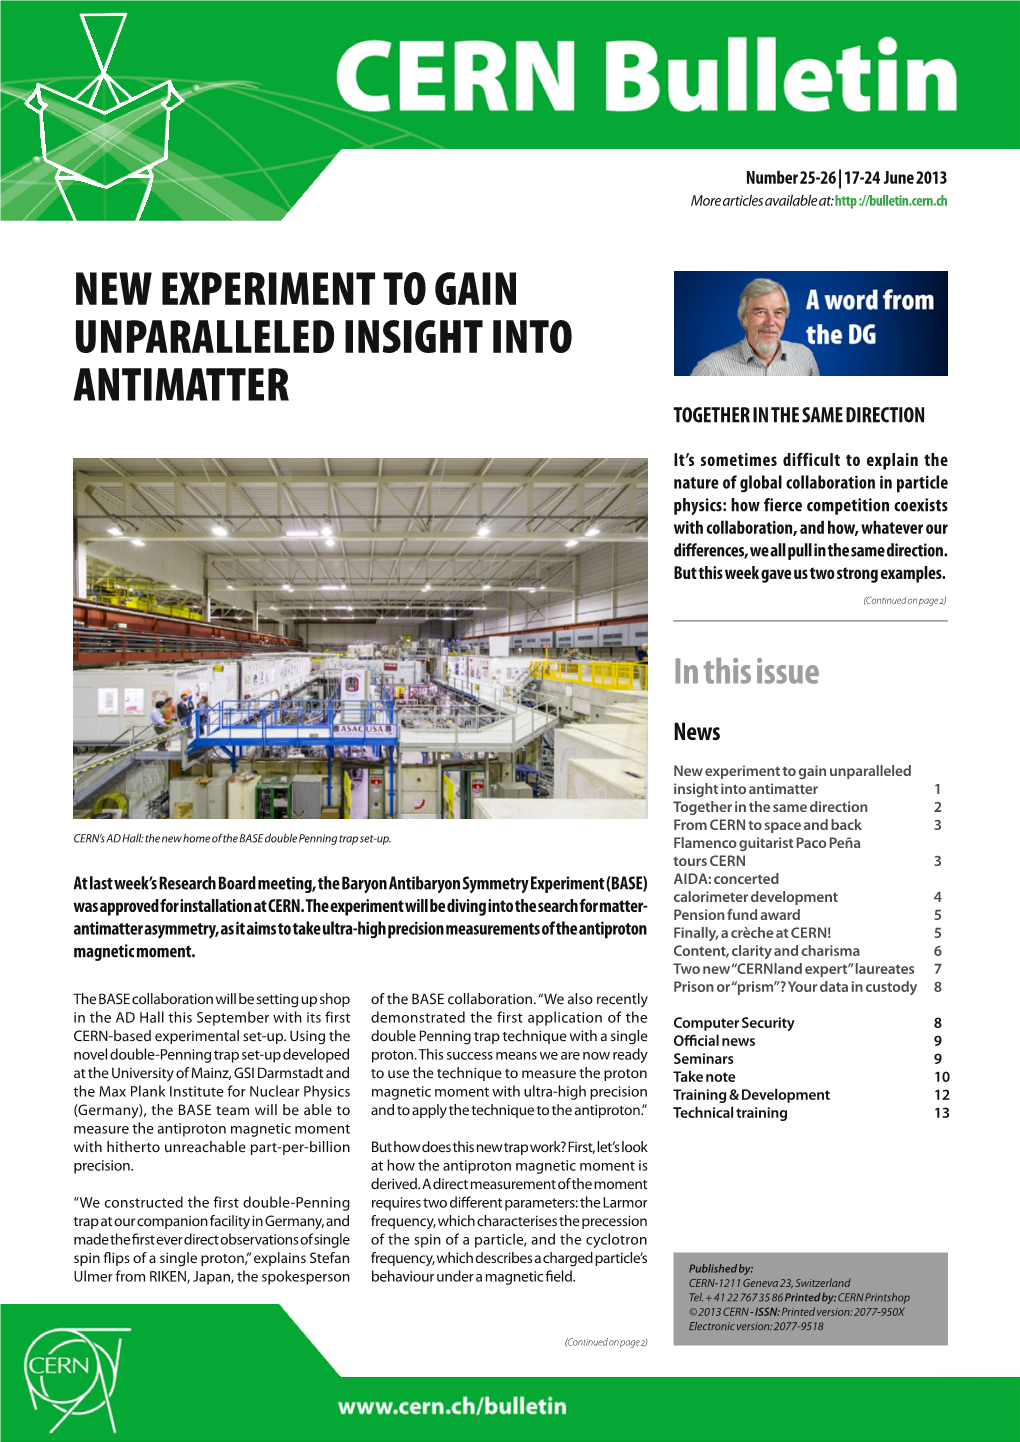 New Experiment to Gain Unparalleled Insight Into Antimatter Together in the Same Direction